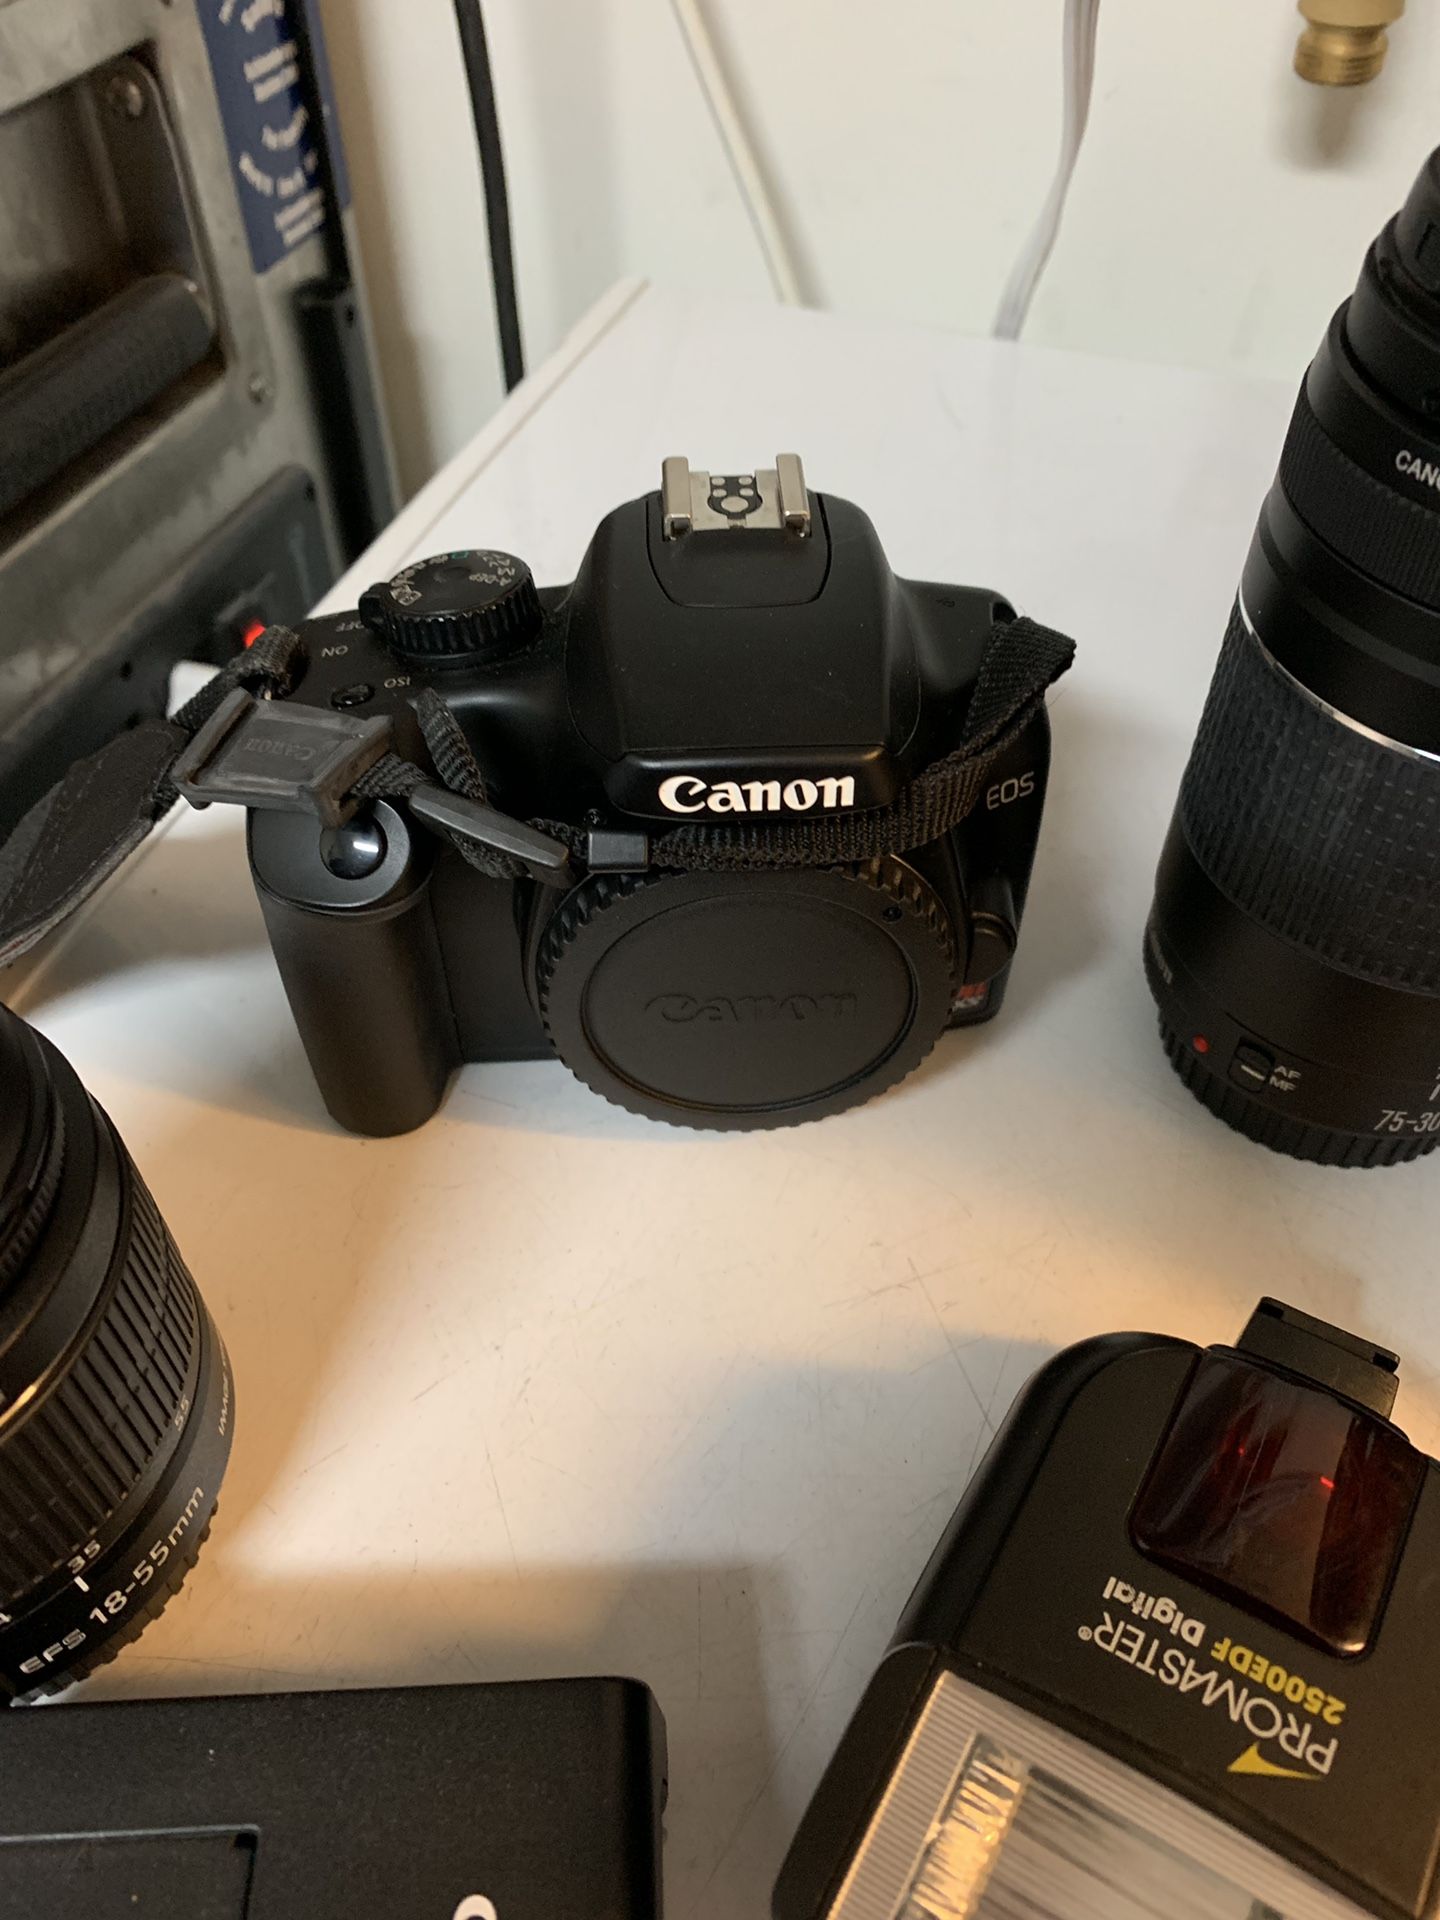 Barely Used Canon Rebel XS DSLR Camera. Selling as a set ONLY!